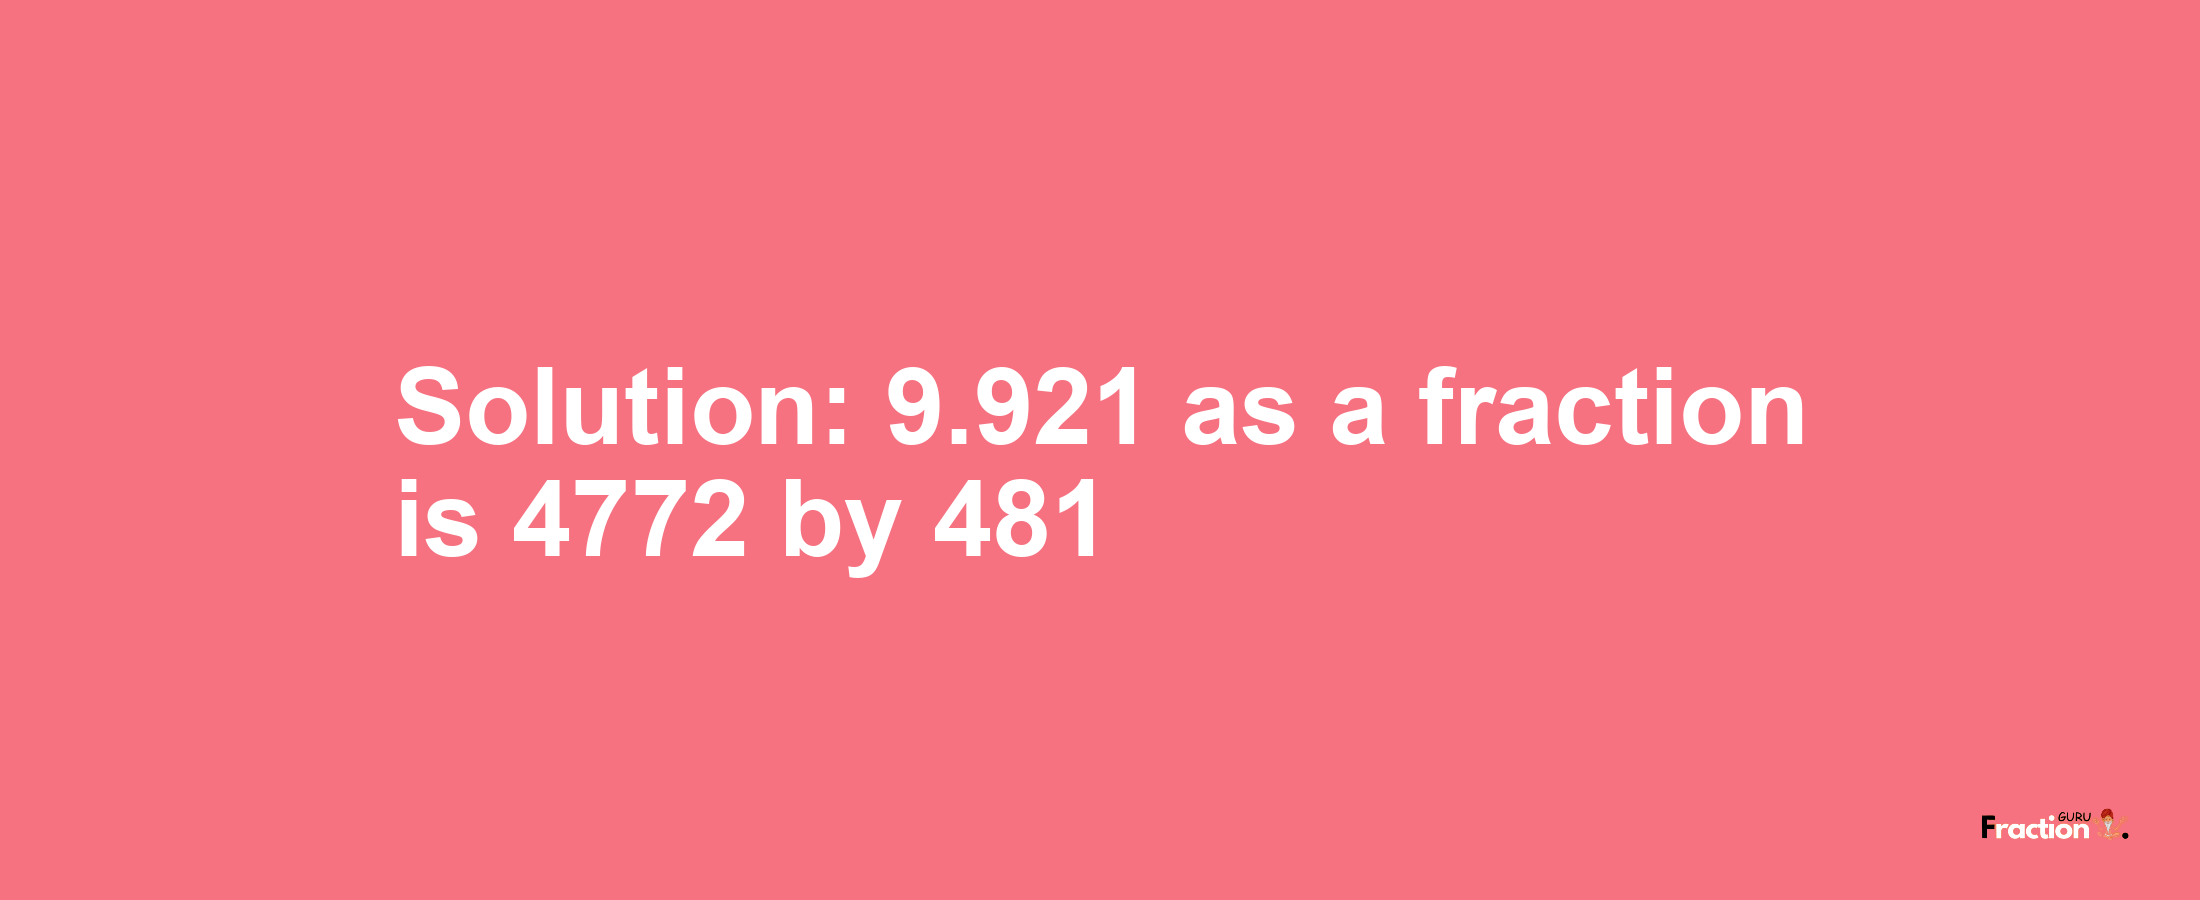 Solution:9.921 as a fraction is 4772/481